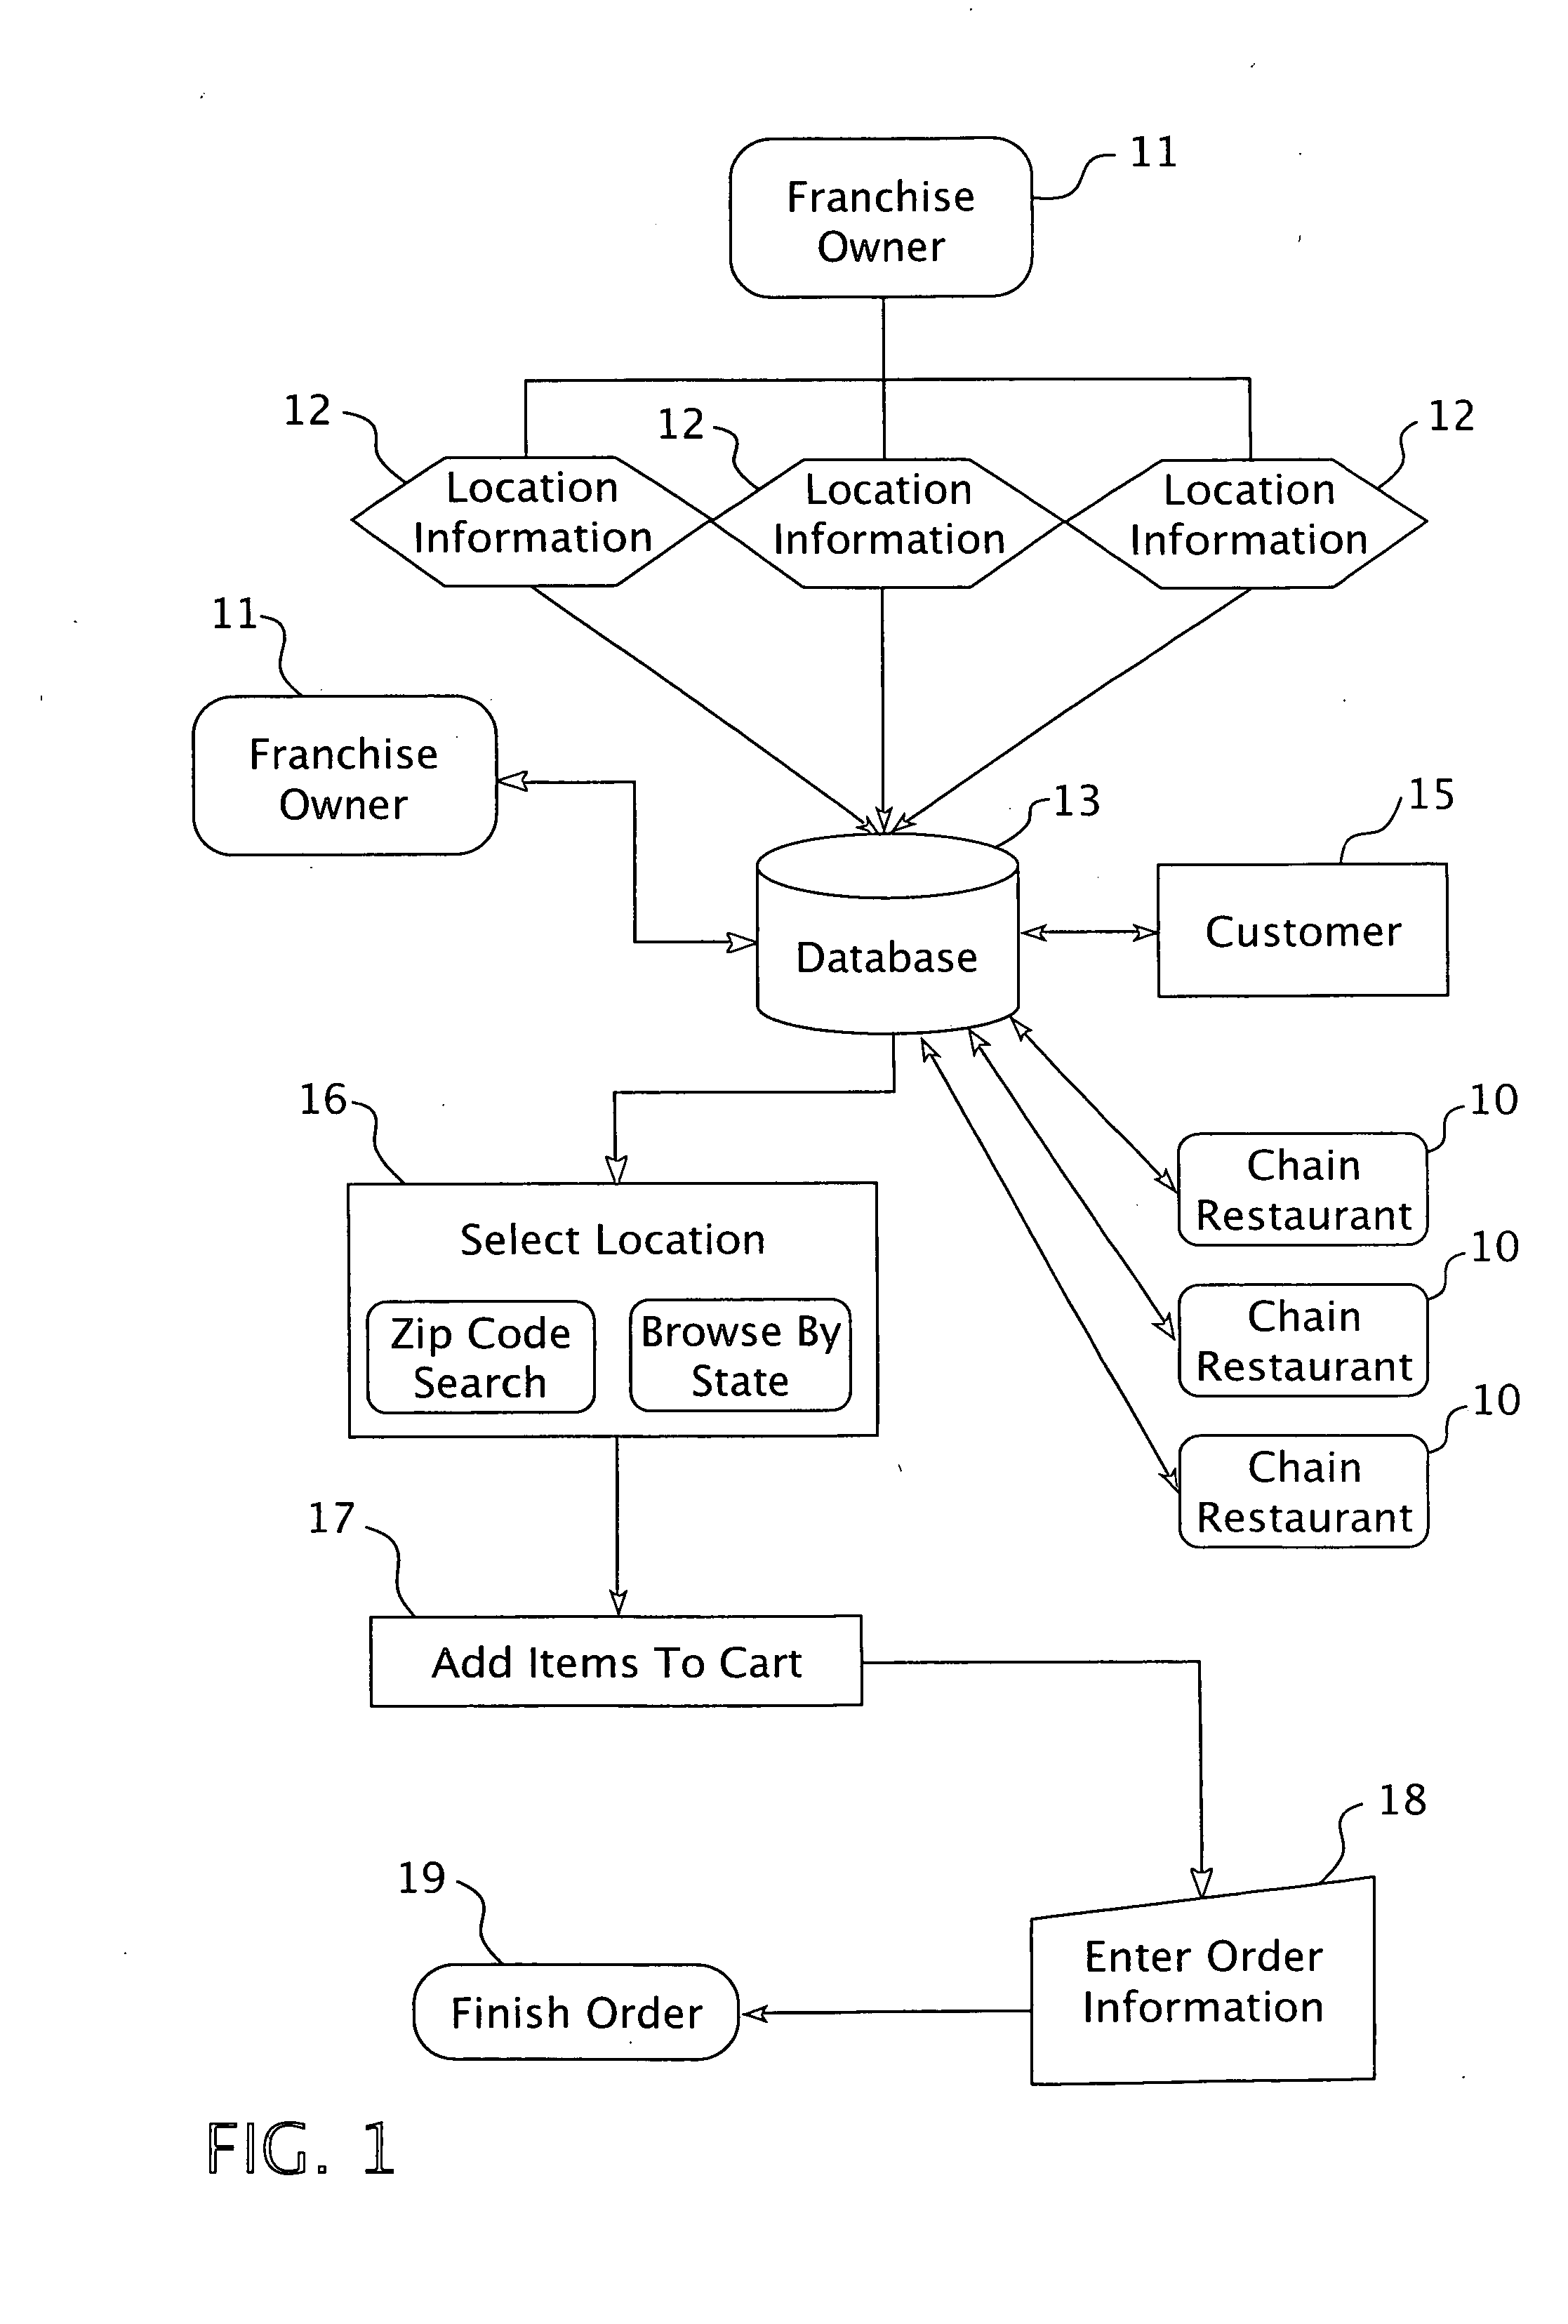 Method for operating a catering business